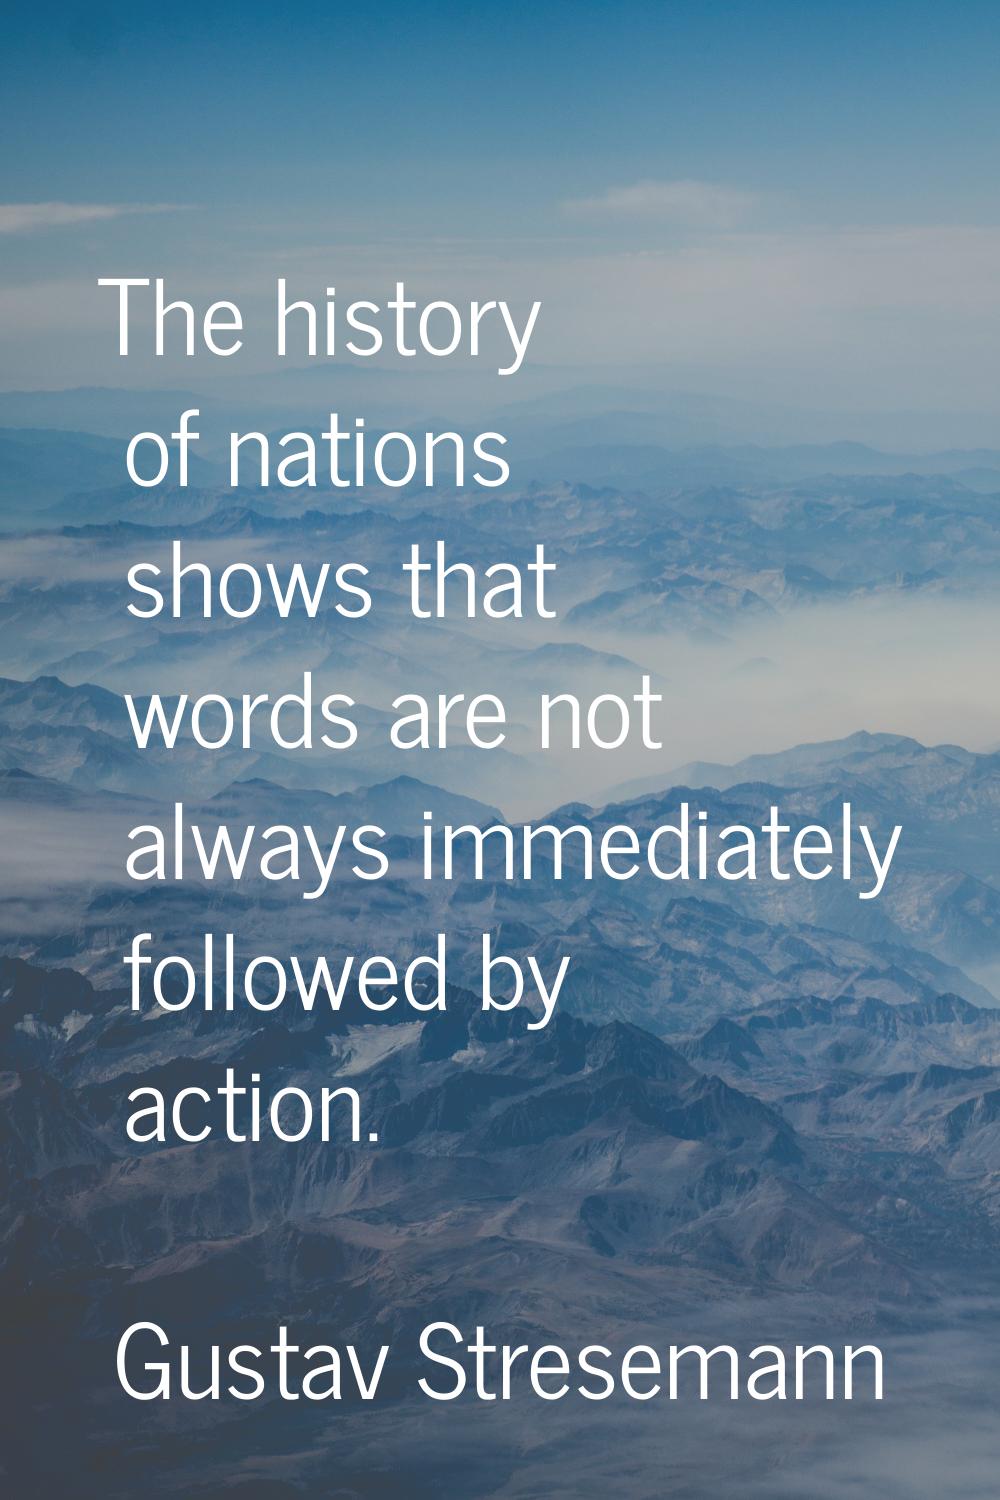 The history of nations shows that words are not always immediately followed by action.